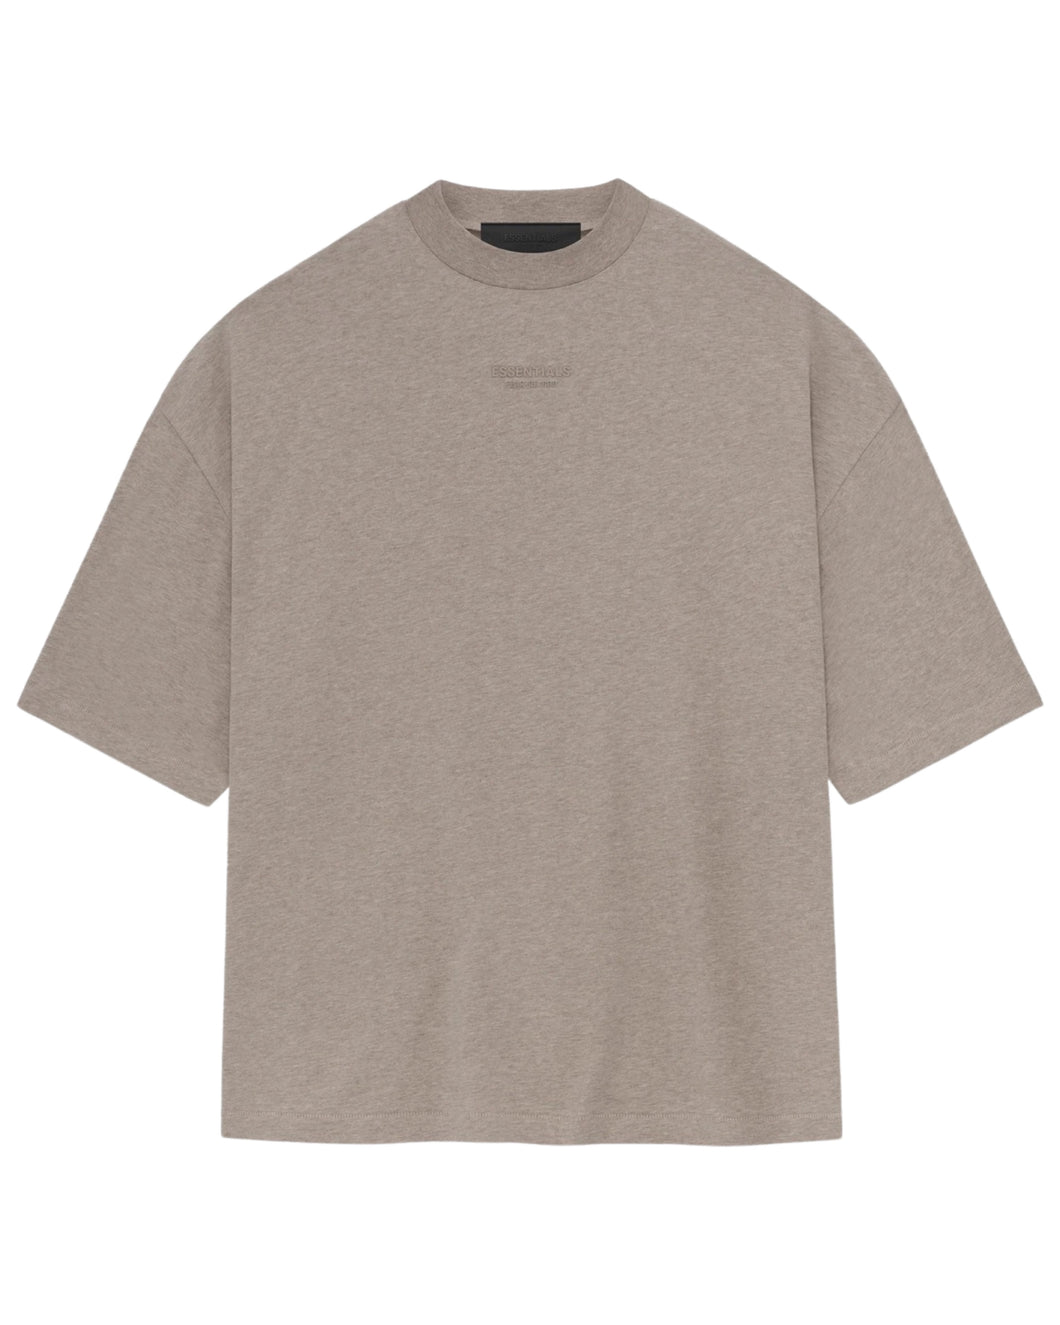 Fear of God Essentials FW23 Core Heather Short Sleeve T-Shirt ⏐ Multiple Sizes